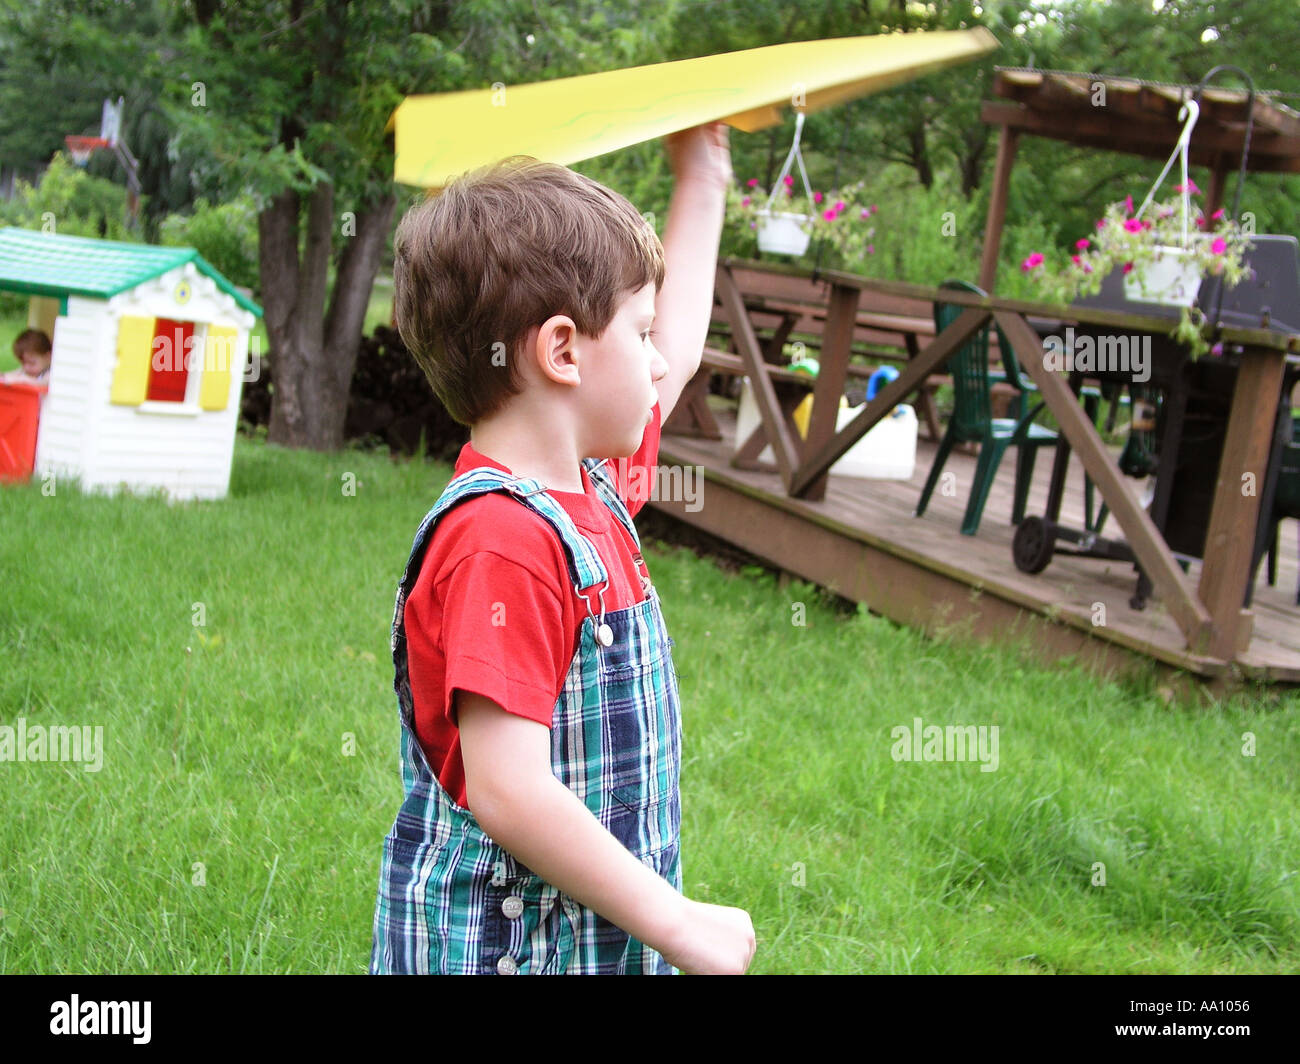 BOY WITH PAPER AIRPLANE flying in backyard Little brother in the distance Photographed in Pennsylvania Stock Photo